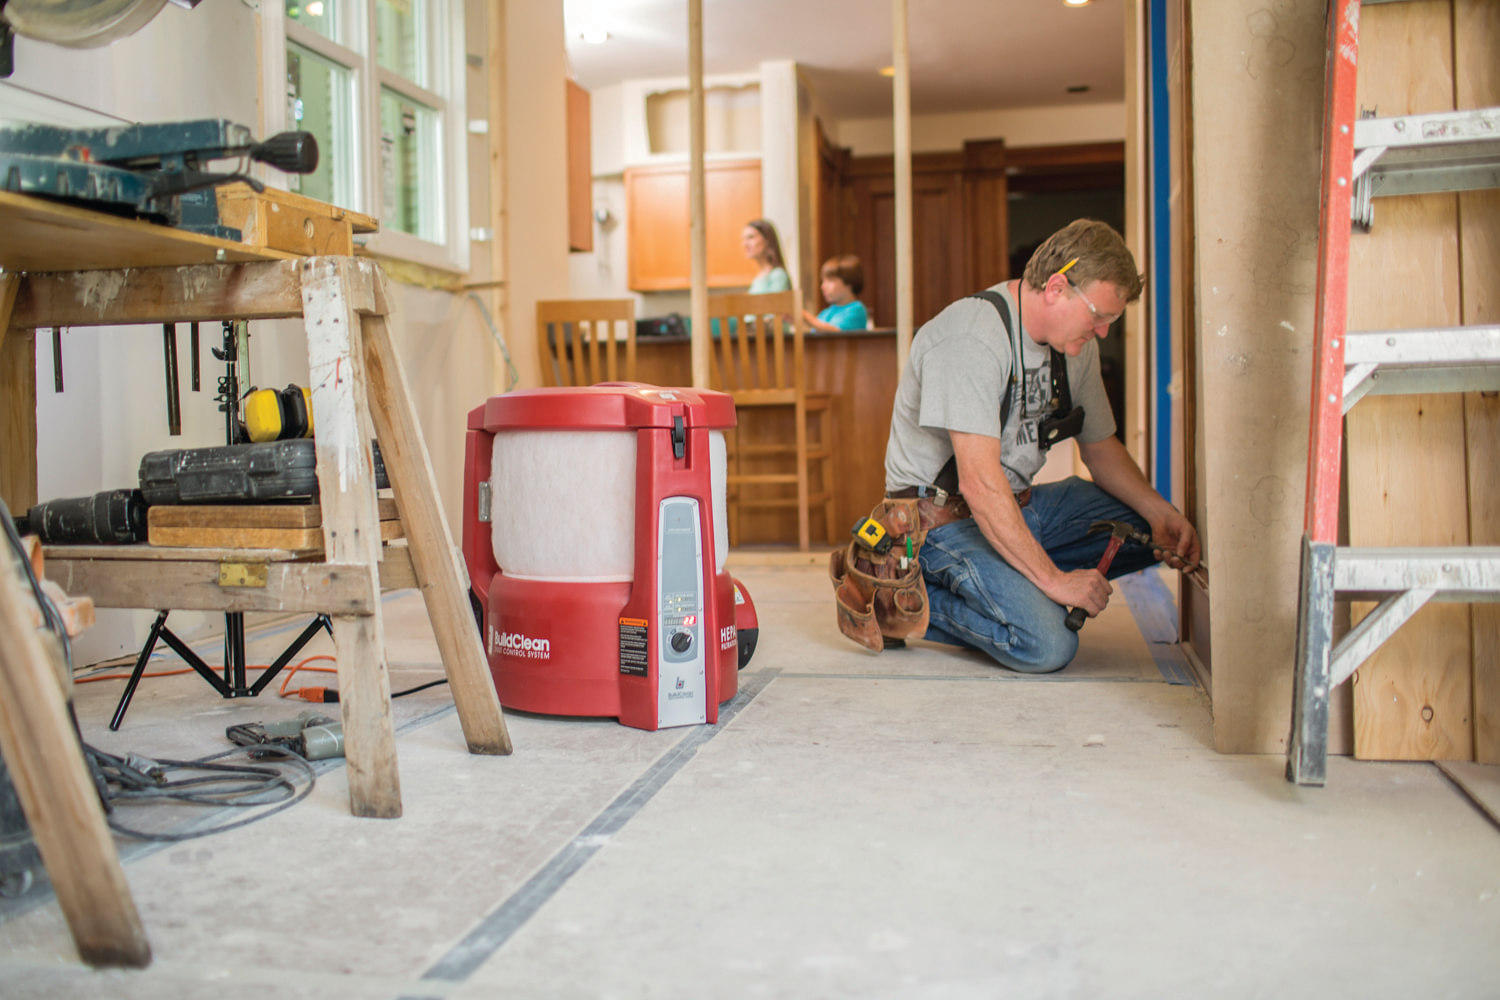 How To Manage The Dust And Dirt Of Home Improvements?